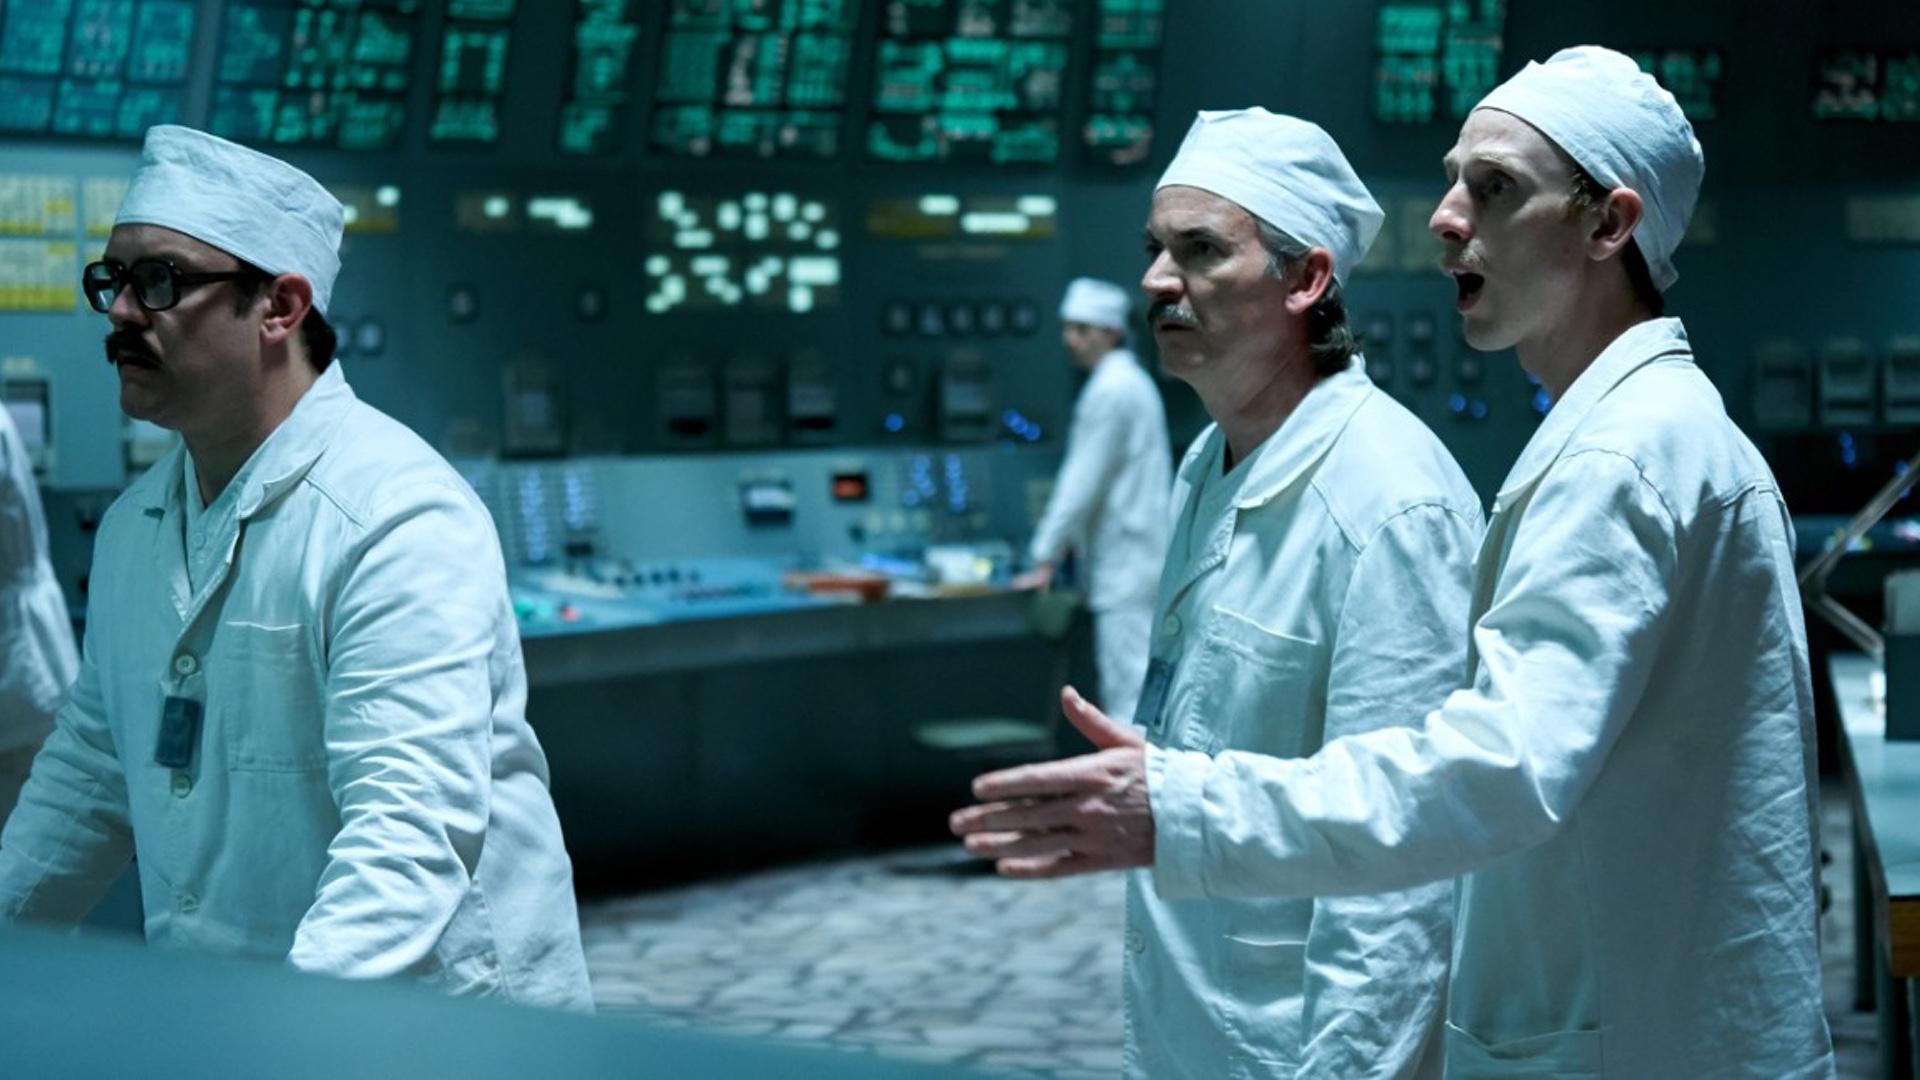 Nightmarish Full For HBO's Nuclear Disaster Miniseries